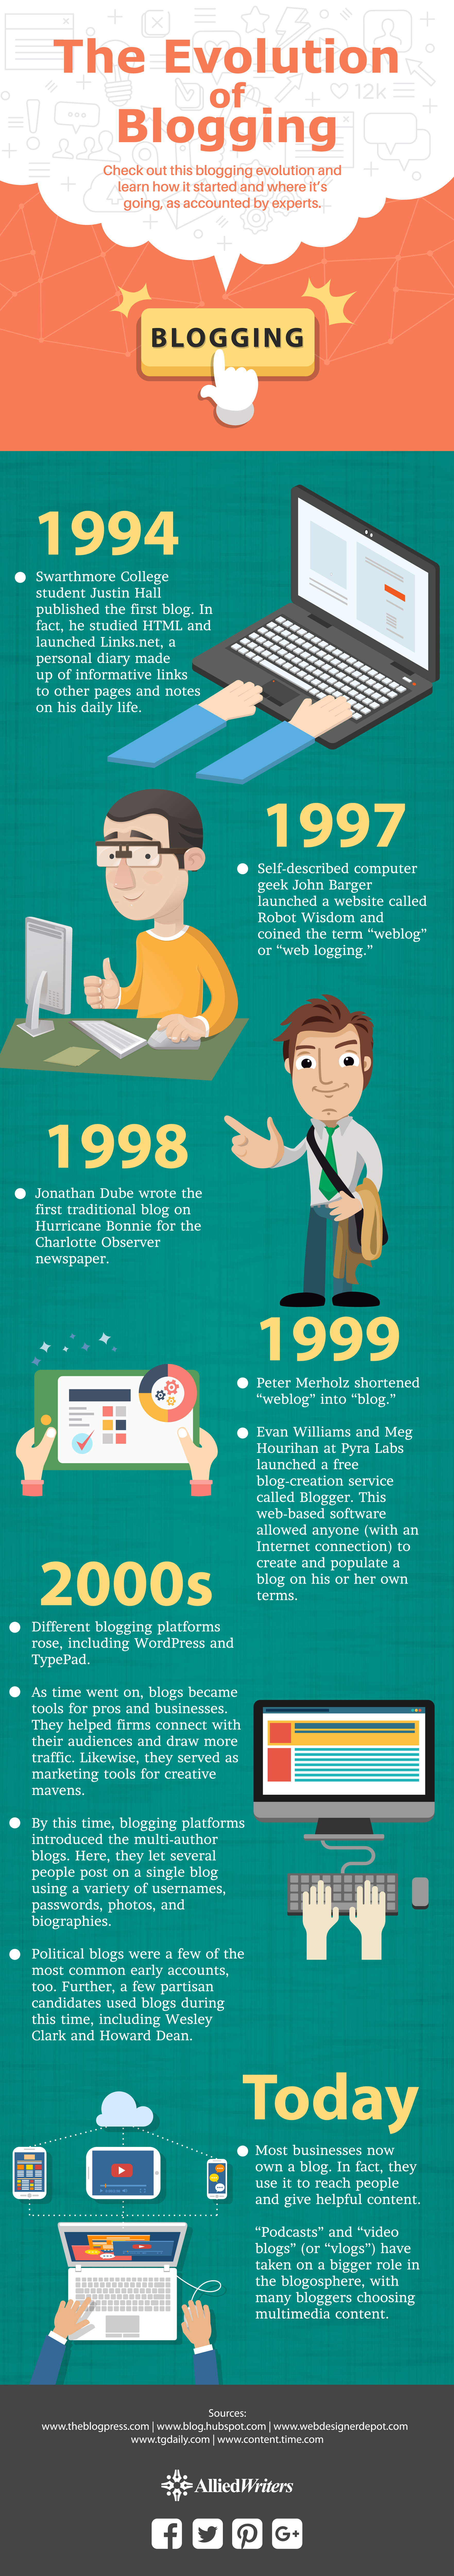 about blogging evolution: infographic